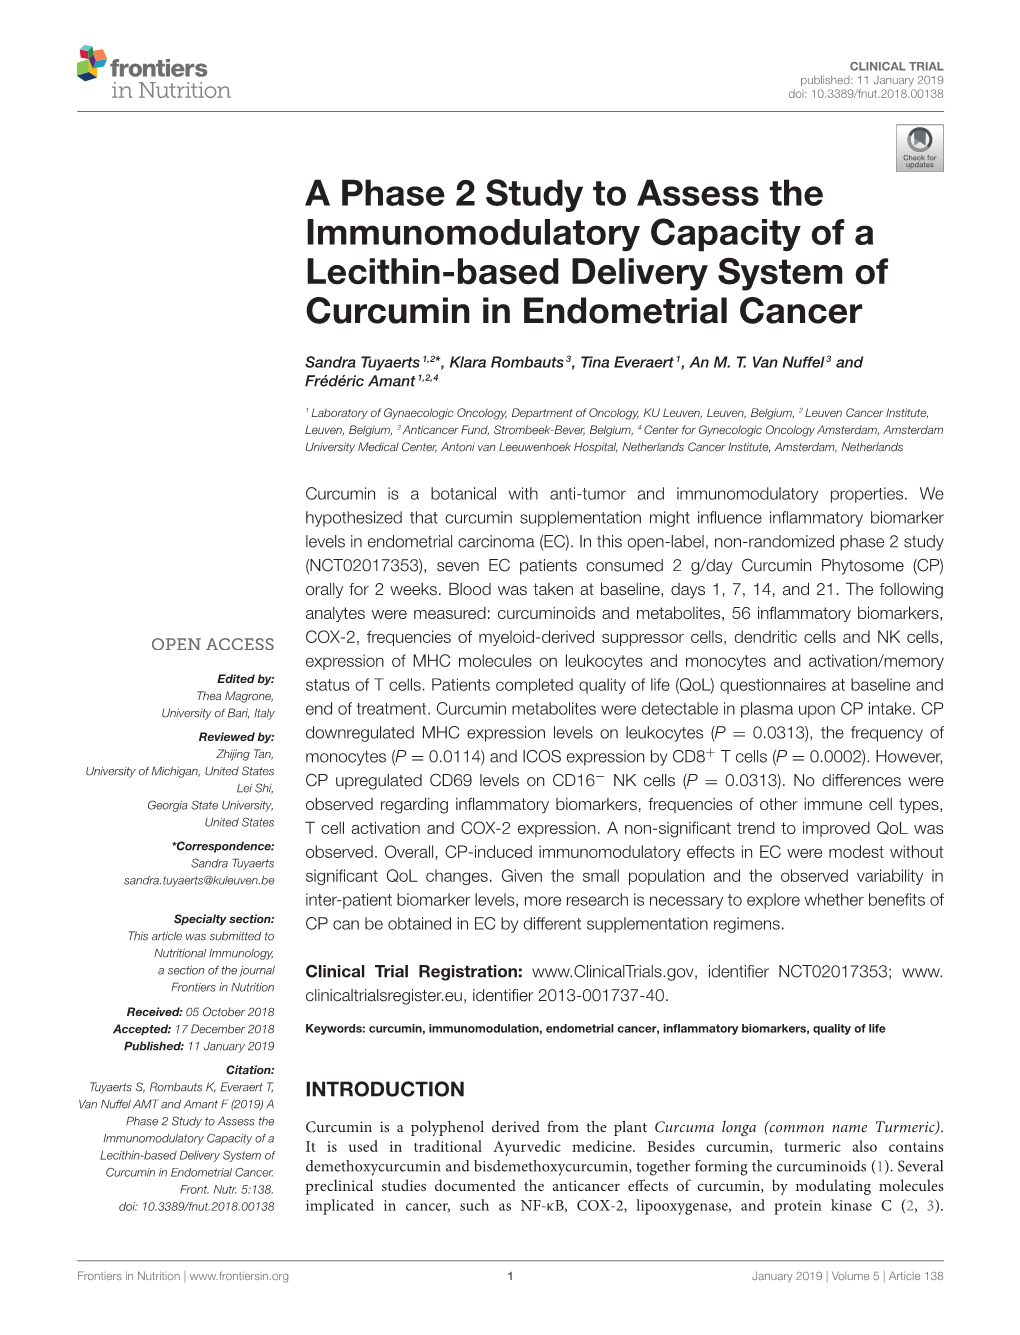 A Phase 2 Study to Assess the Immunomodulatory Capacity of a Lecithin-Based Delivery System of Curcumin in Endometrial Cancer